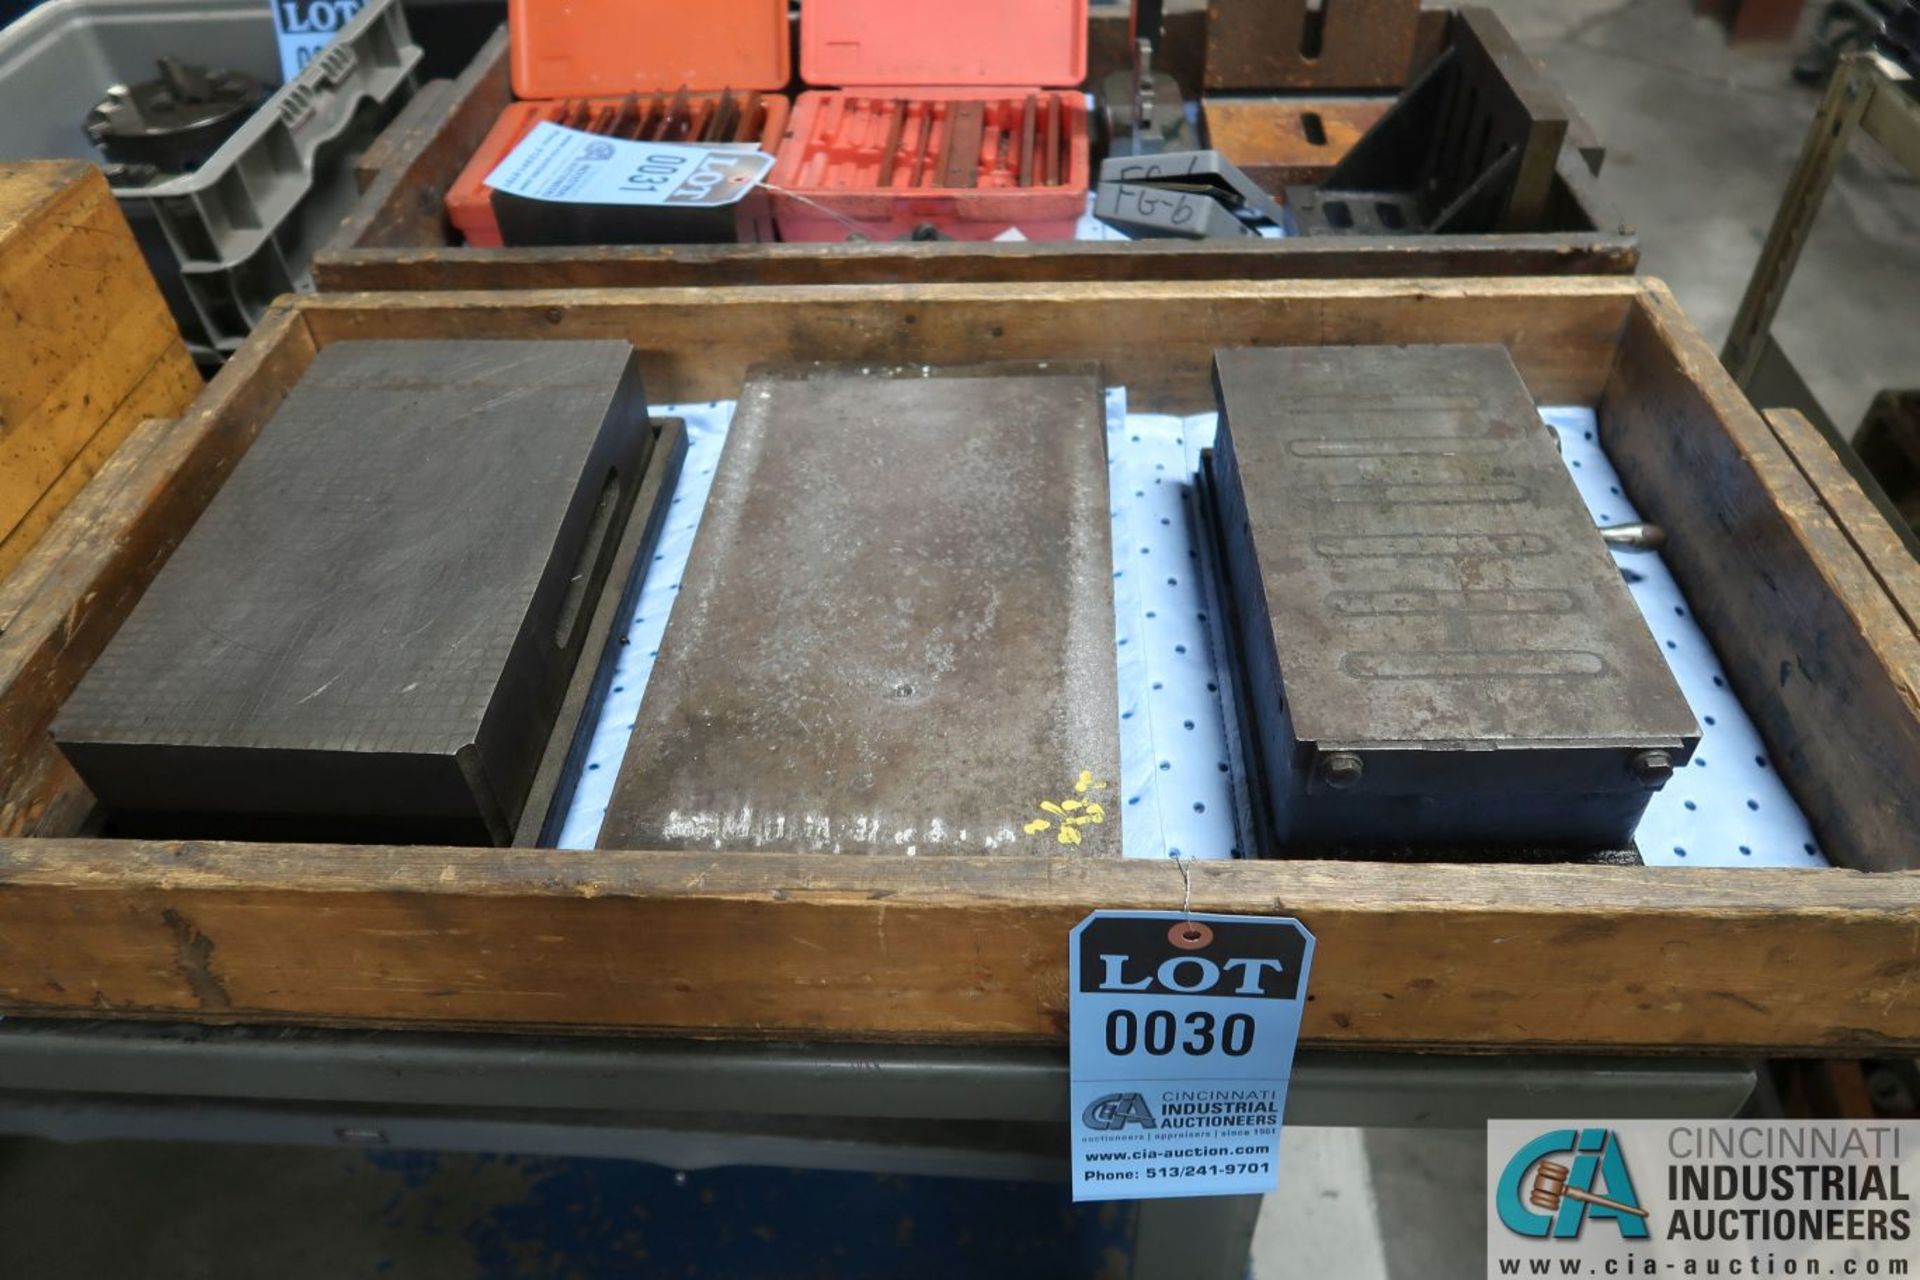 6-1/2" X 11" X 3", 7-1/2" X 13" X 2-1/2" CAST IRON SURFACE PLATES WITH 5-1/2" X 10-1/2" MAGNETIC